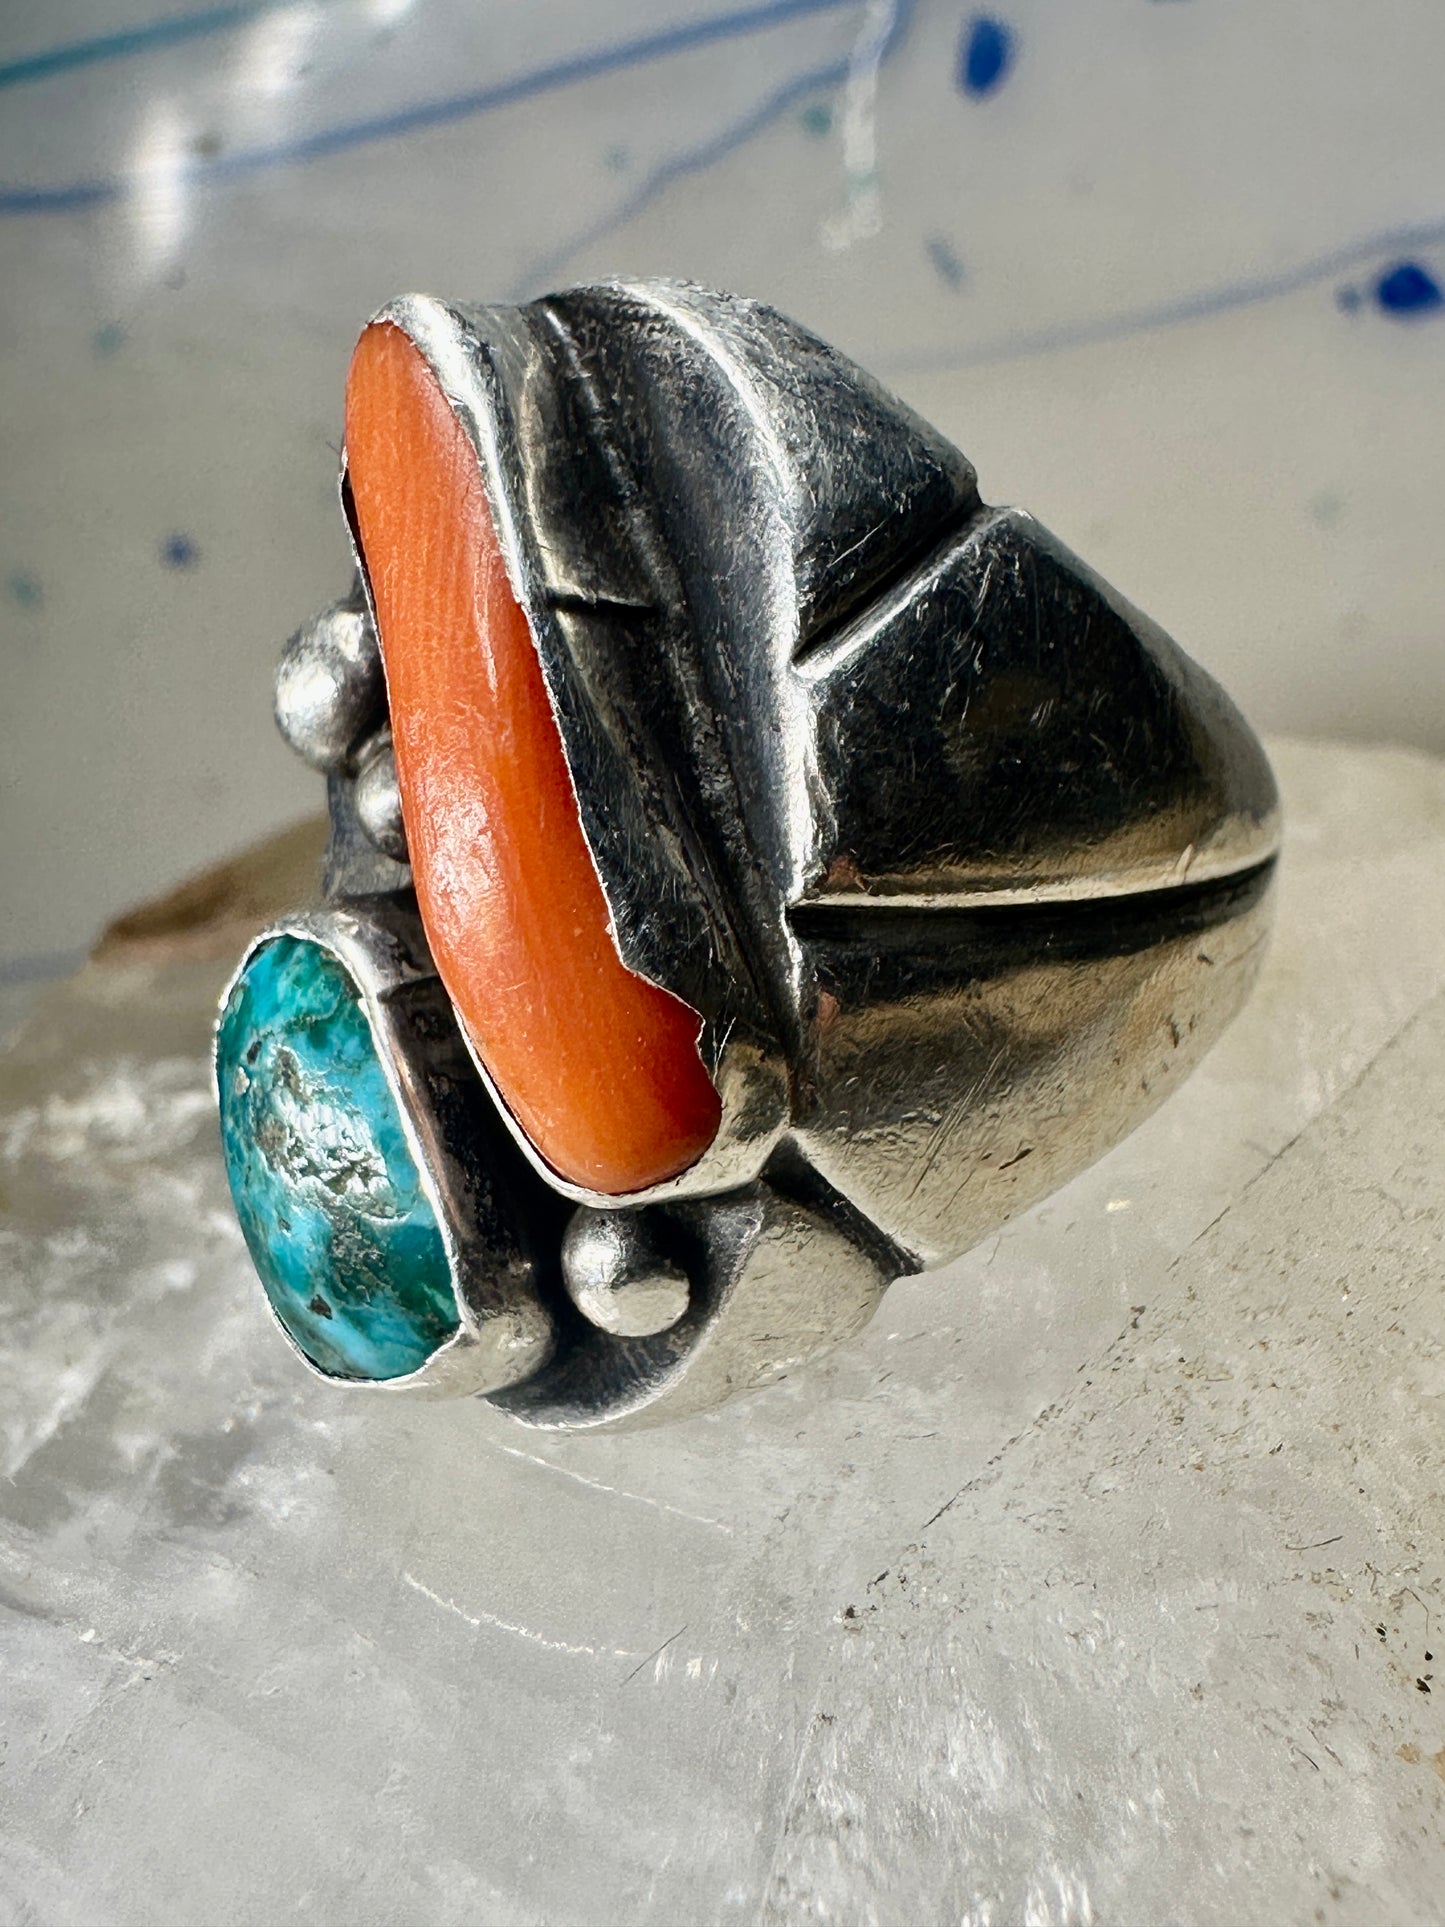 Navajo ring size 9.25 turquoise coral band sterling silver band women men